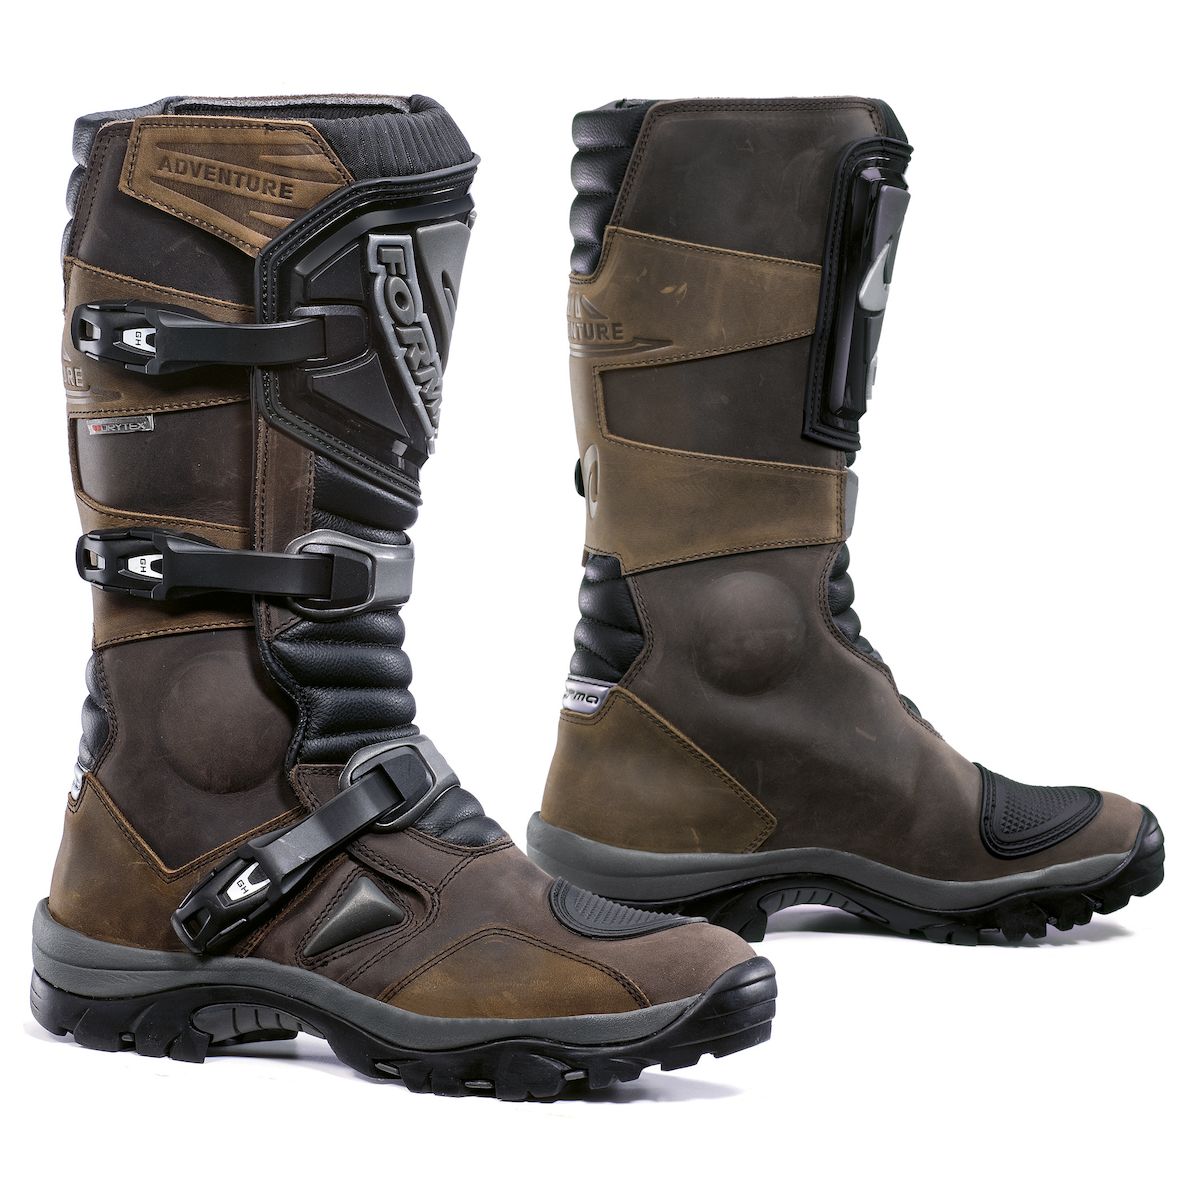 FORMA ADVENTURE BOOTS: Brown